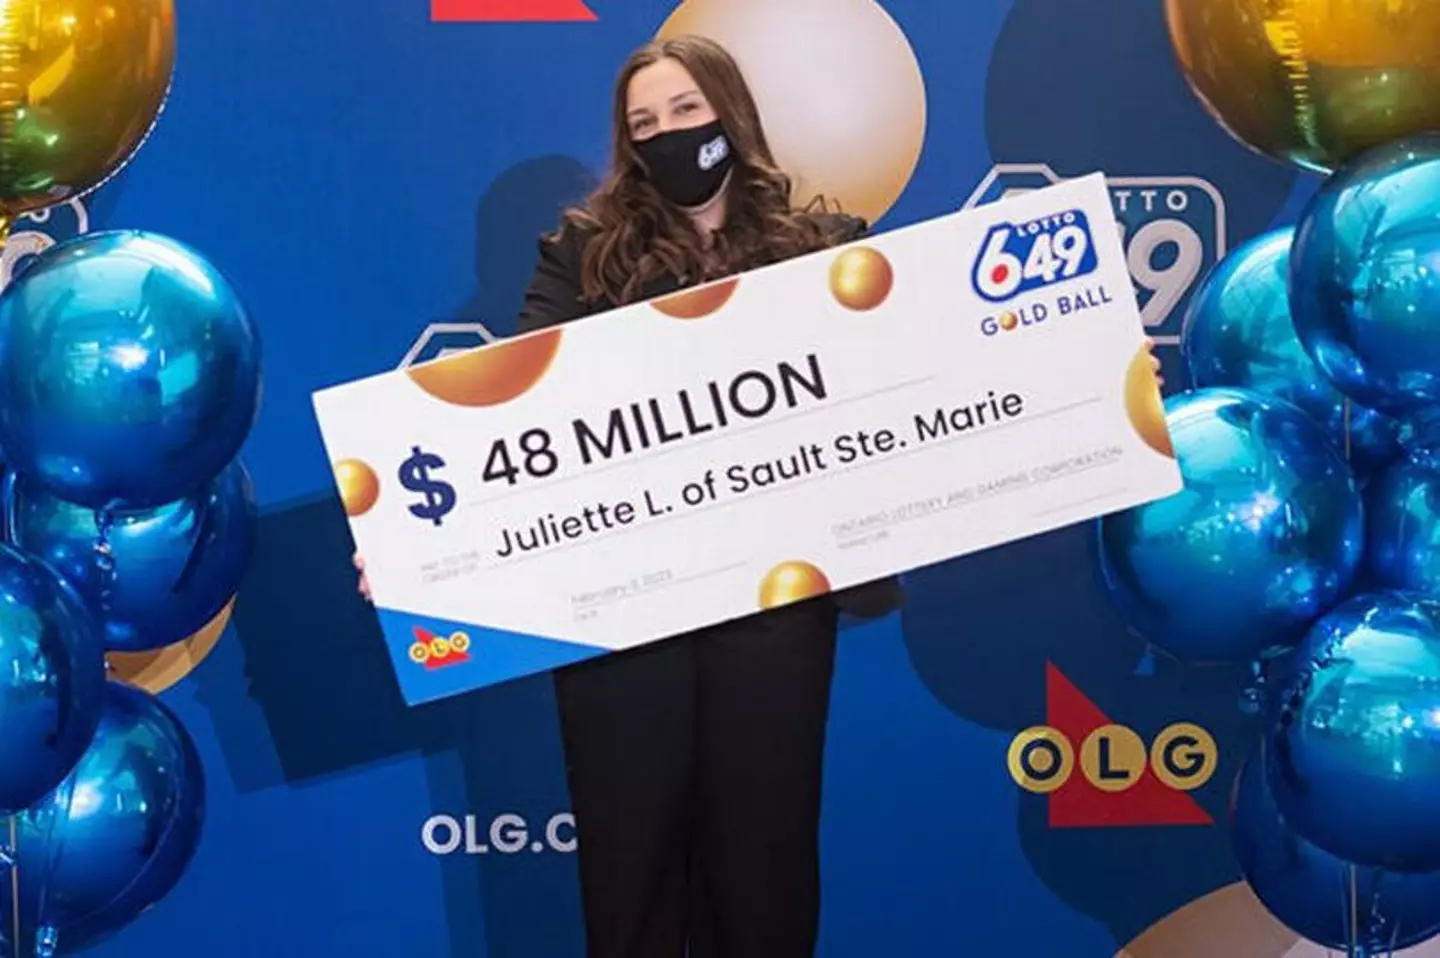 18-year-old Juliette Lamour stood proudly with the cheque for her winning ticket.